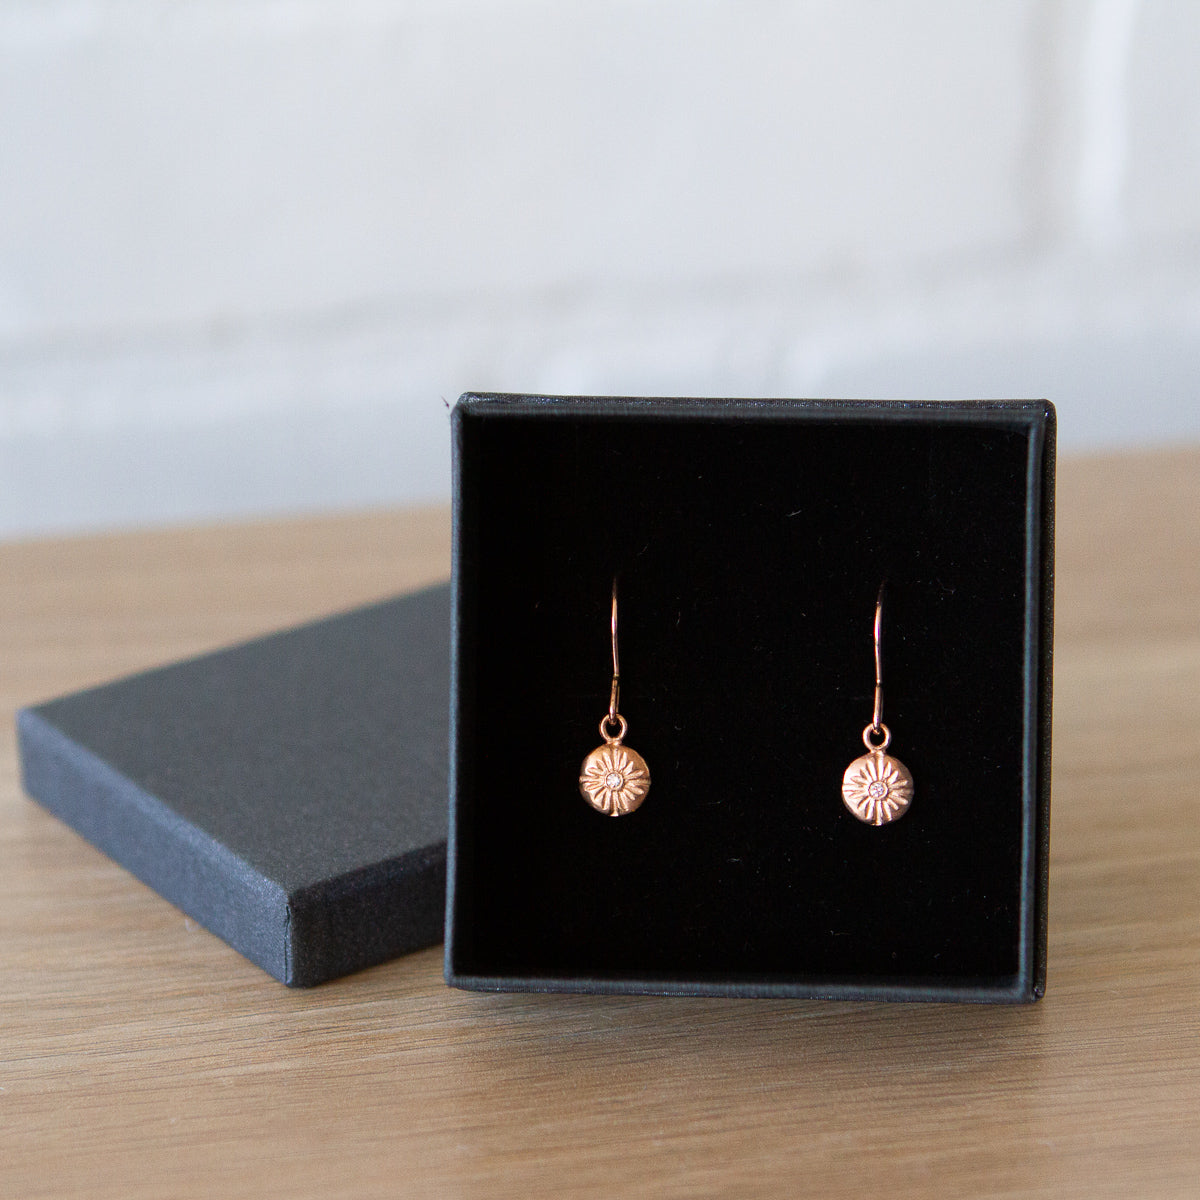 Rose Gold Sunburst Lucia Earrings with Diamonds in a gift box